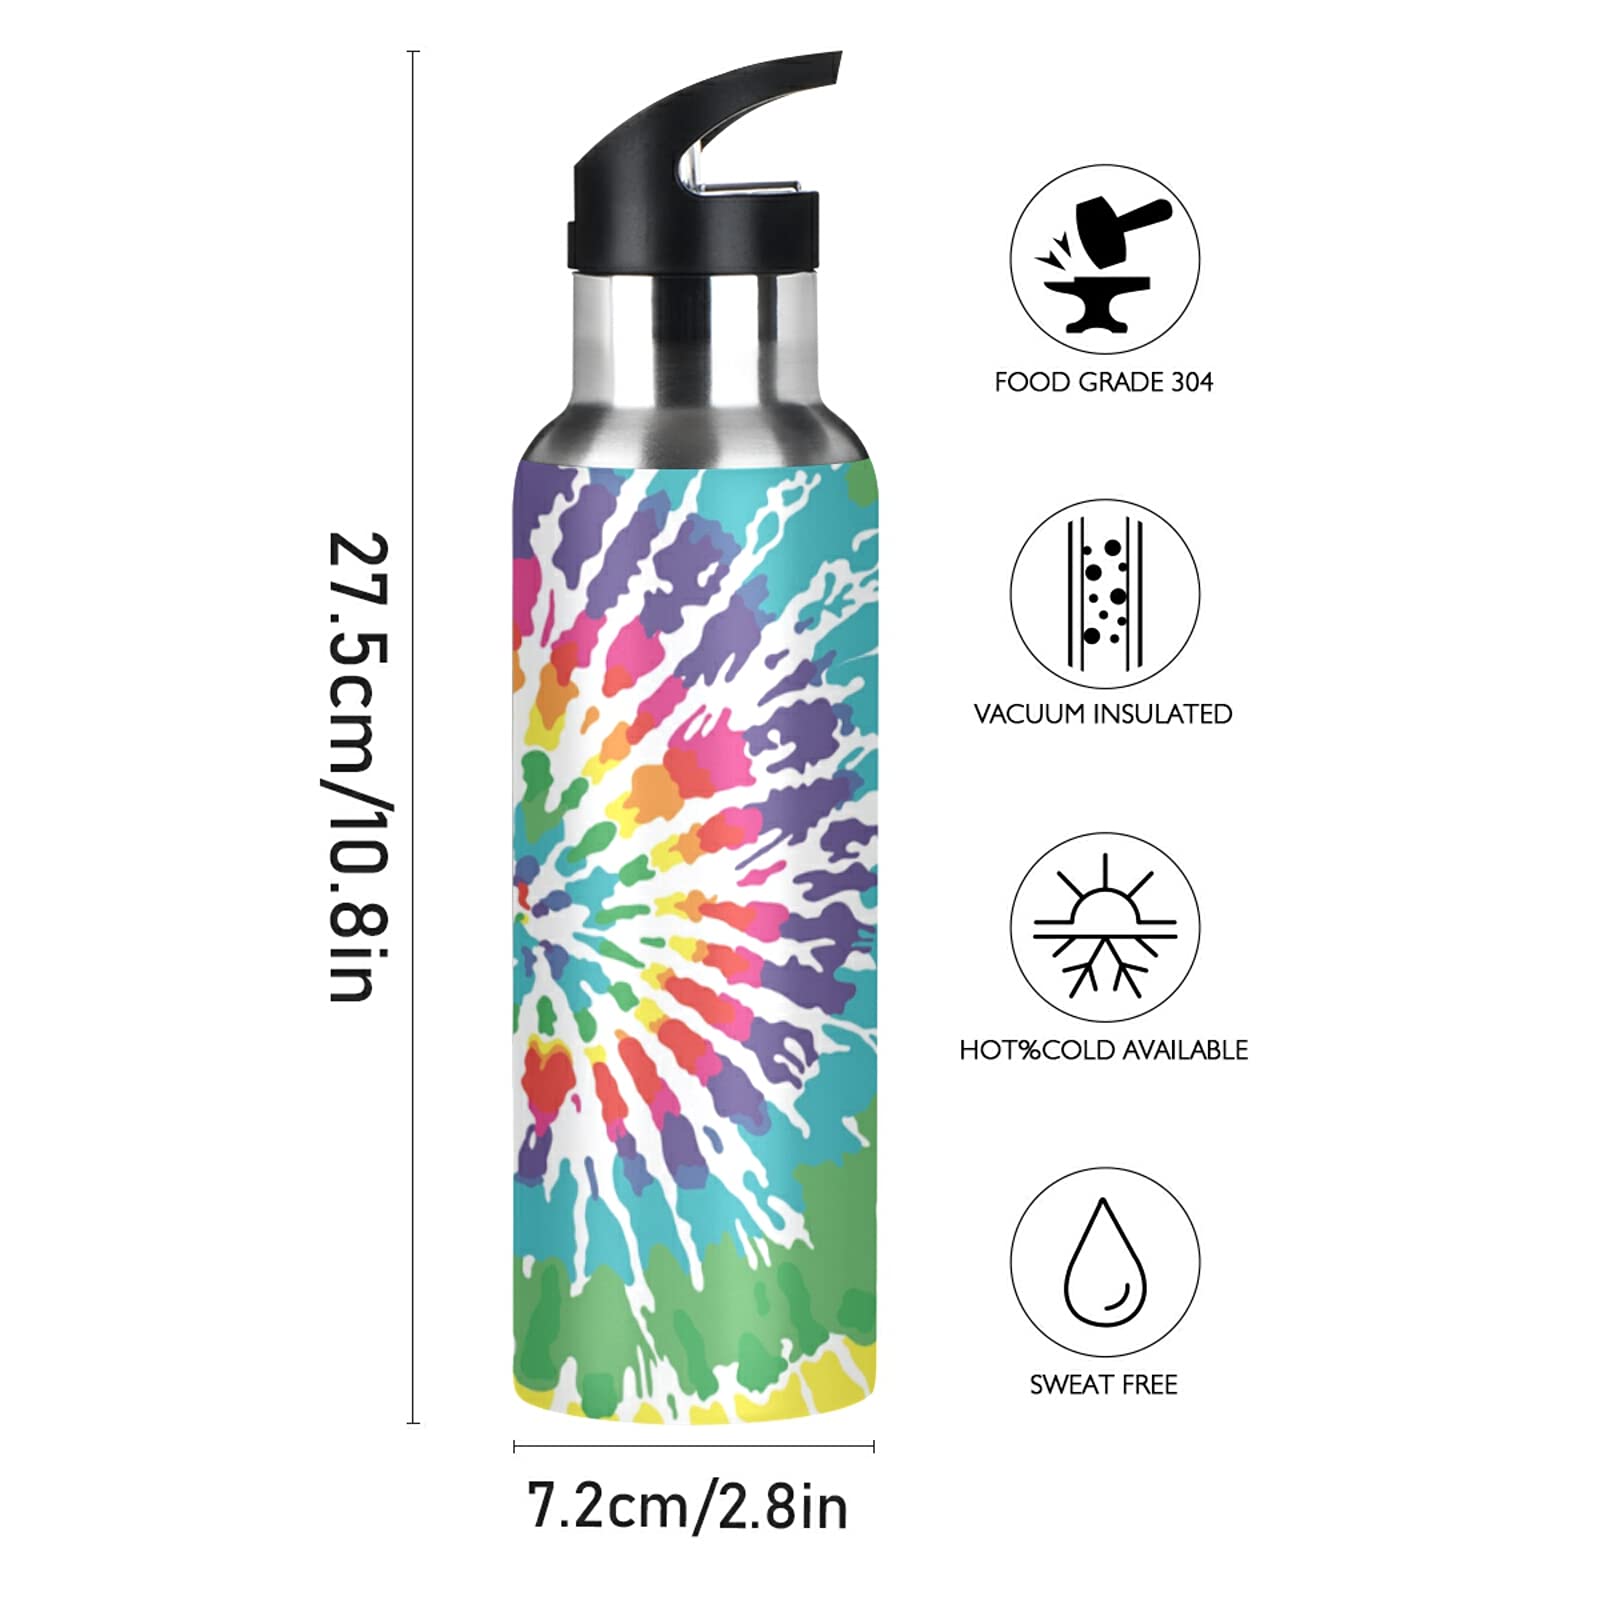 Insulated Water Bottle with Straw Lid for Kids and Drivers,Sports and Travel Reusable Double Wall Vacuum-Insulated Stainless Thermos with Wide Handle,BPA-Free,21-Ounce (600ml),Tie Dye